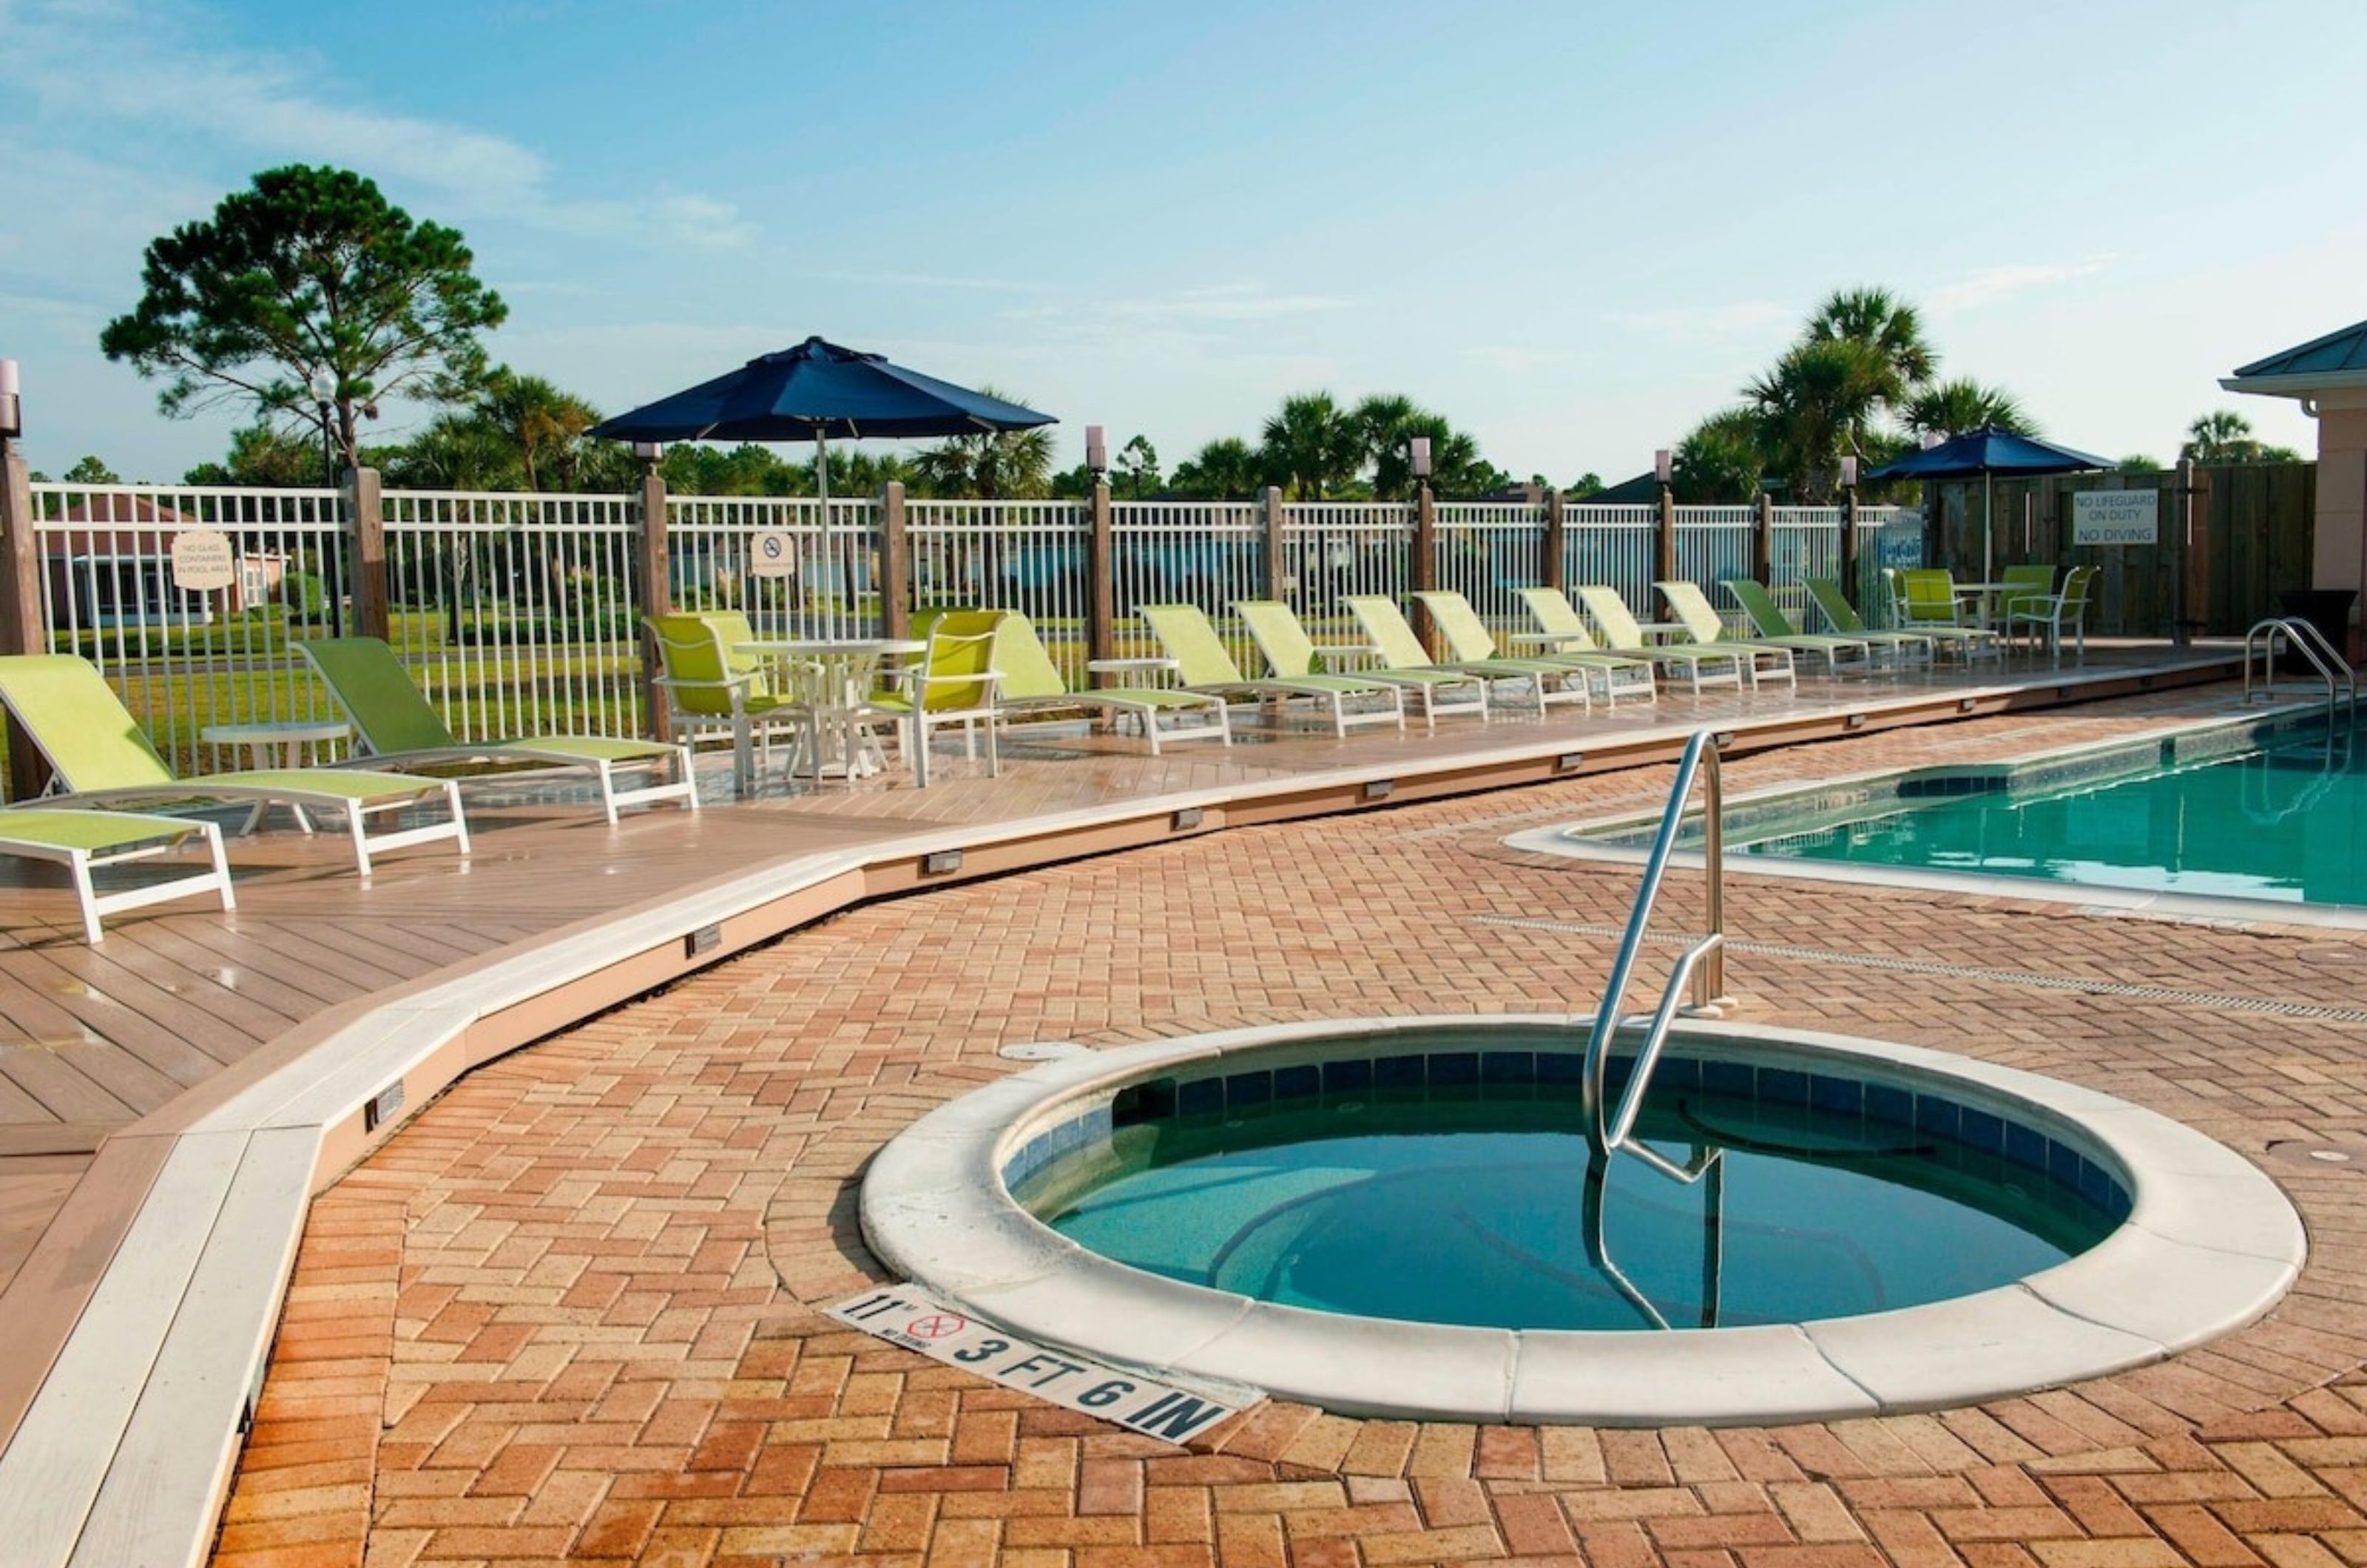 The outdoor hot tub at Fairfield Inn and Suites in Orange Beach Alabama 